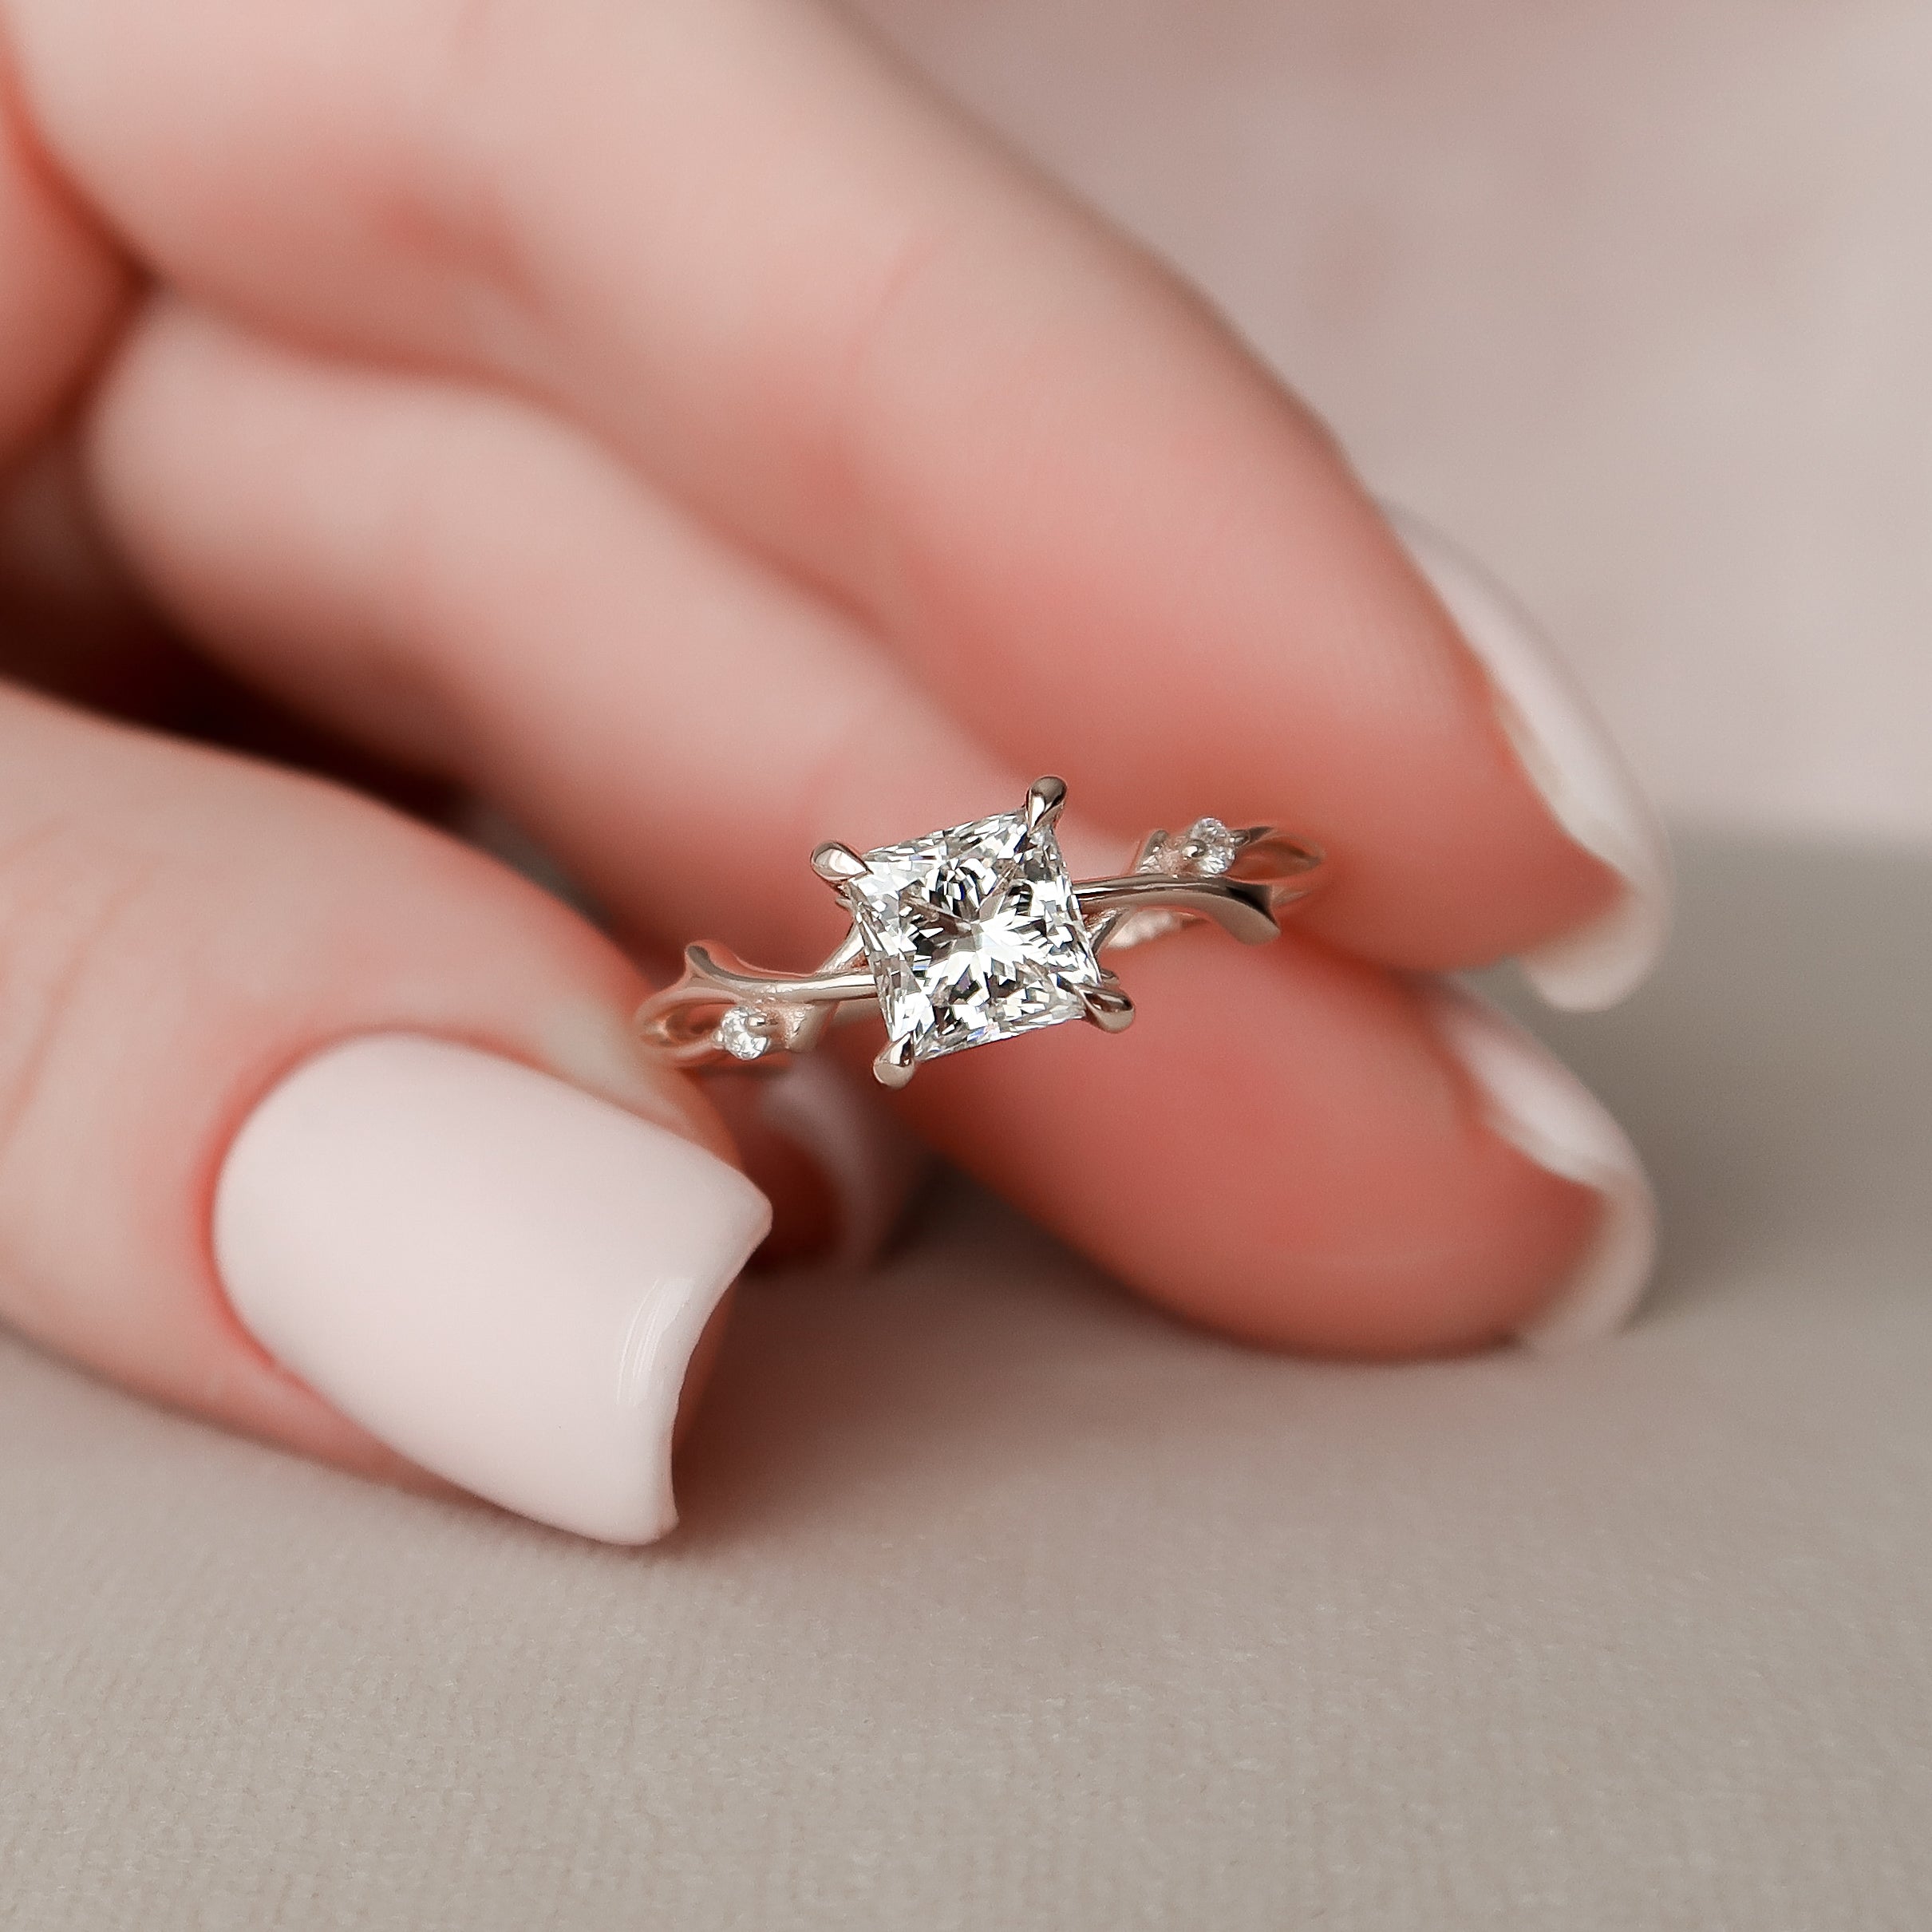 1 Carat Vs 2 Carat Diamonds | Which is Better For a Ring?